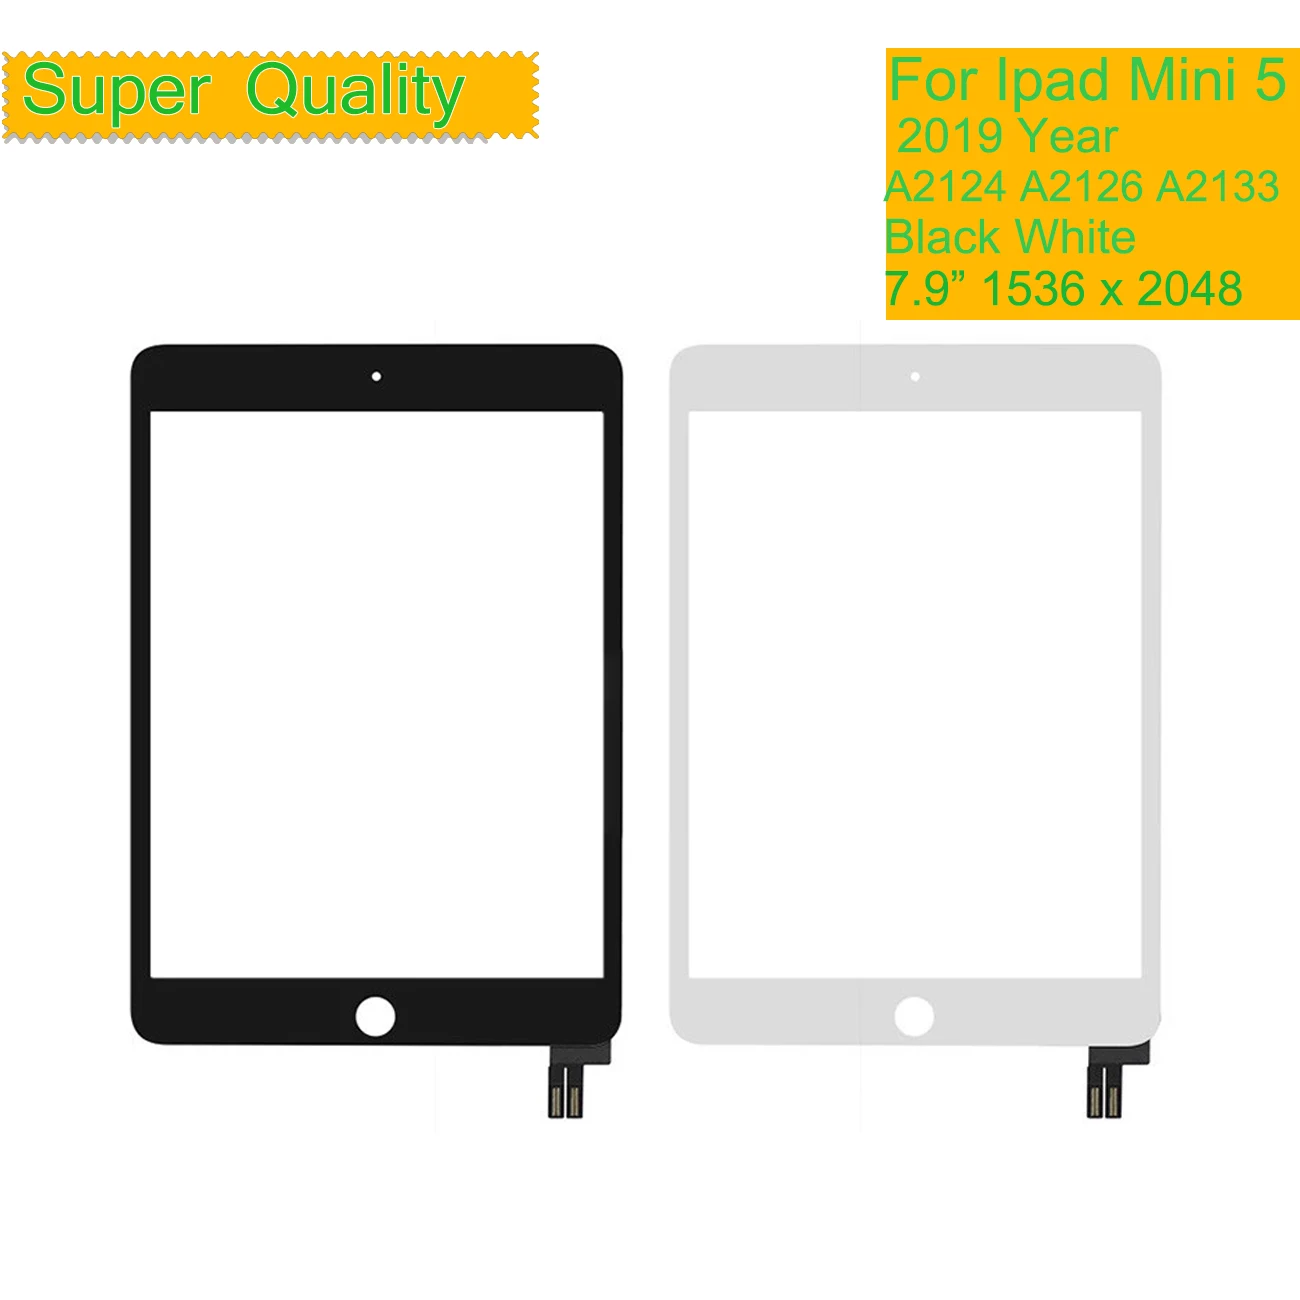 10Pcs/Lot For Apple iPad Mini 5 Touch Screen Digitizer Panel For iPad Mini 5 2019 A2124 A2126 A2133 LCD Front Outer Glass Sensor for wiko fever 4g touch screen panel sensor digitizer front outer glass touchscreen fever 4g touch panel black replacement